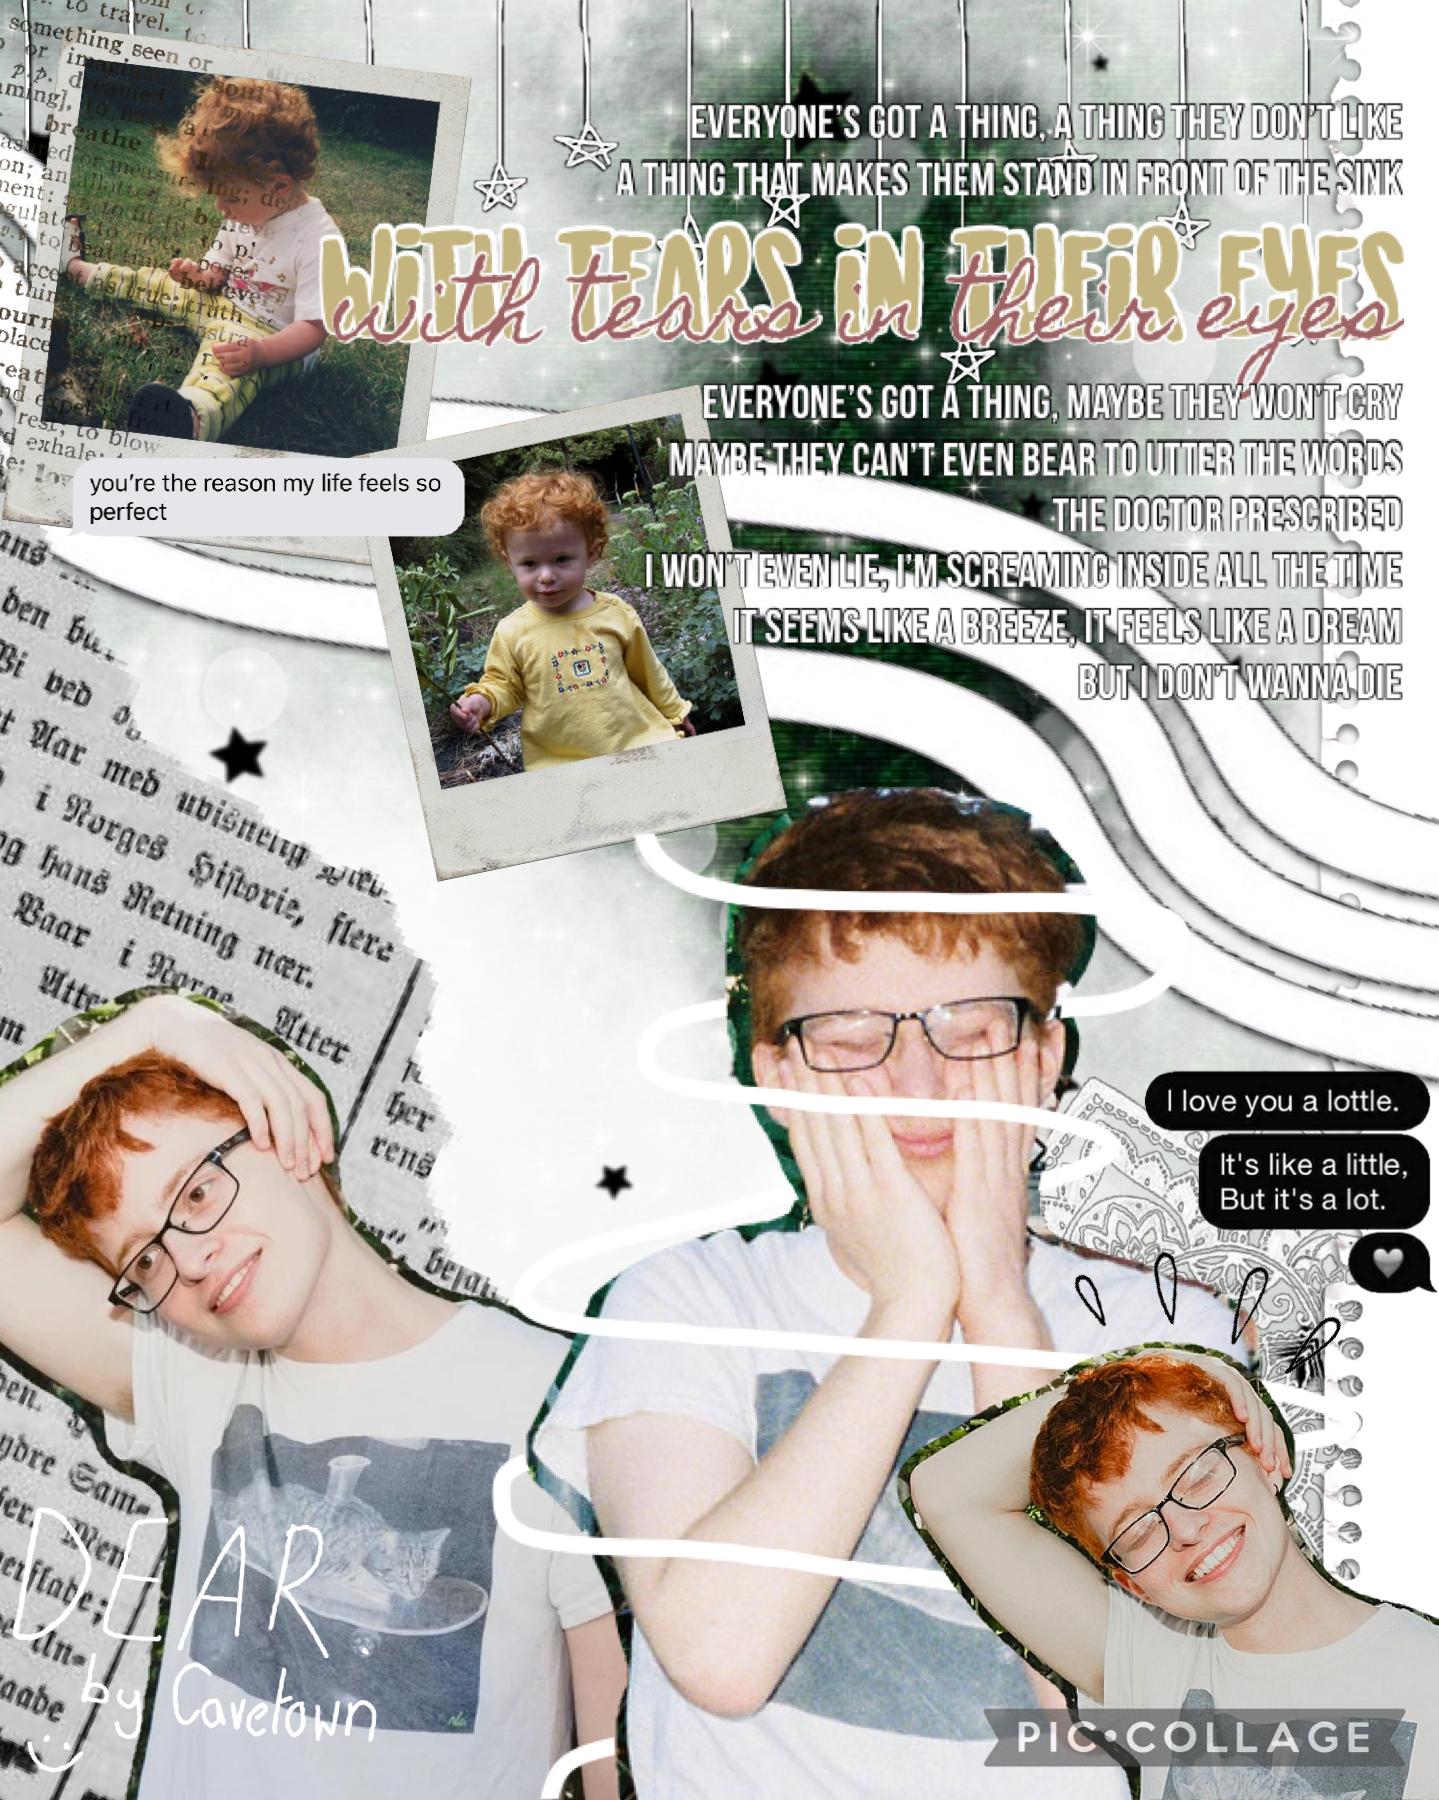 💕 TAP 💕
💕 Cavetown ‘Dear’ collage bc i relate to the song 😐 💕
💕 for @Mon_Amours contest!! (Dunno if i spelt that right 😩) 💕
💕check comments 😂 💕
💕 love uu 💕